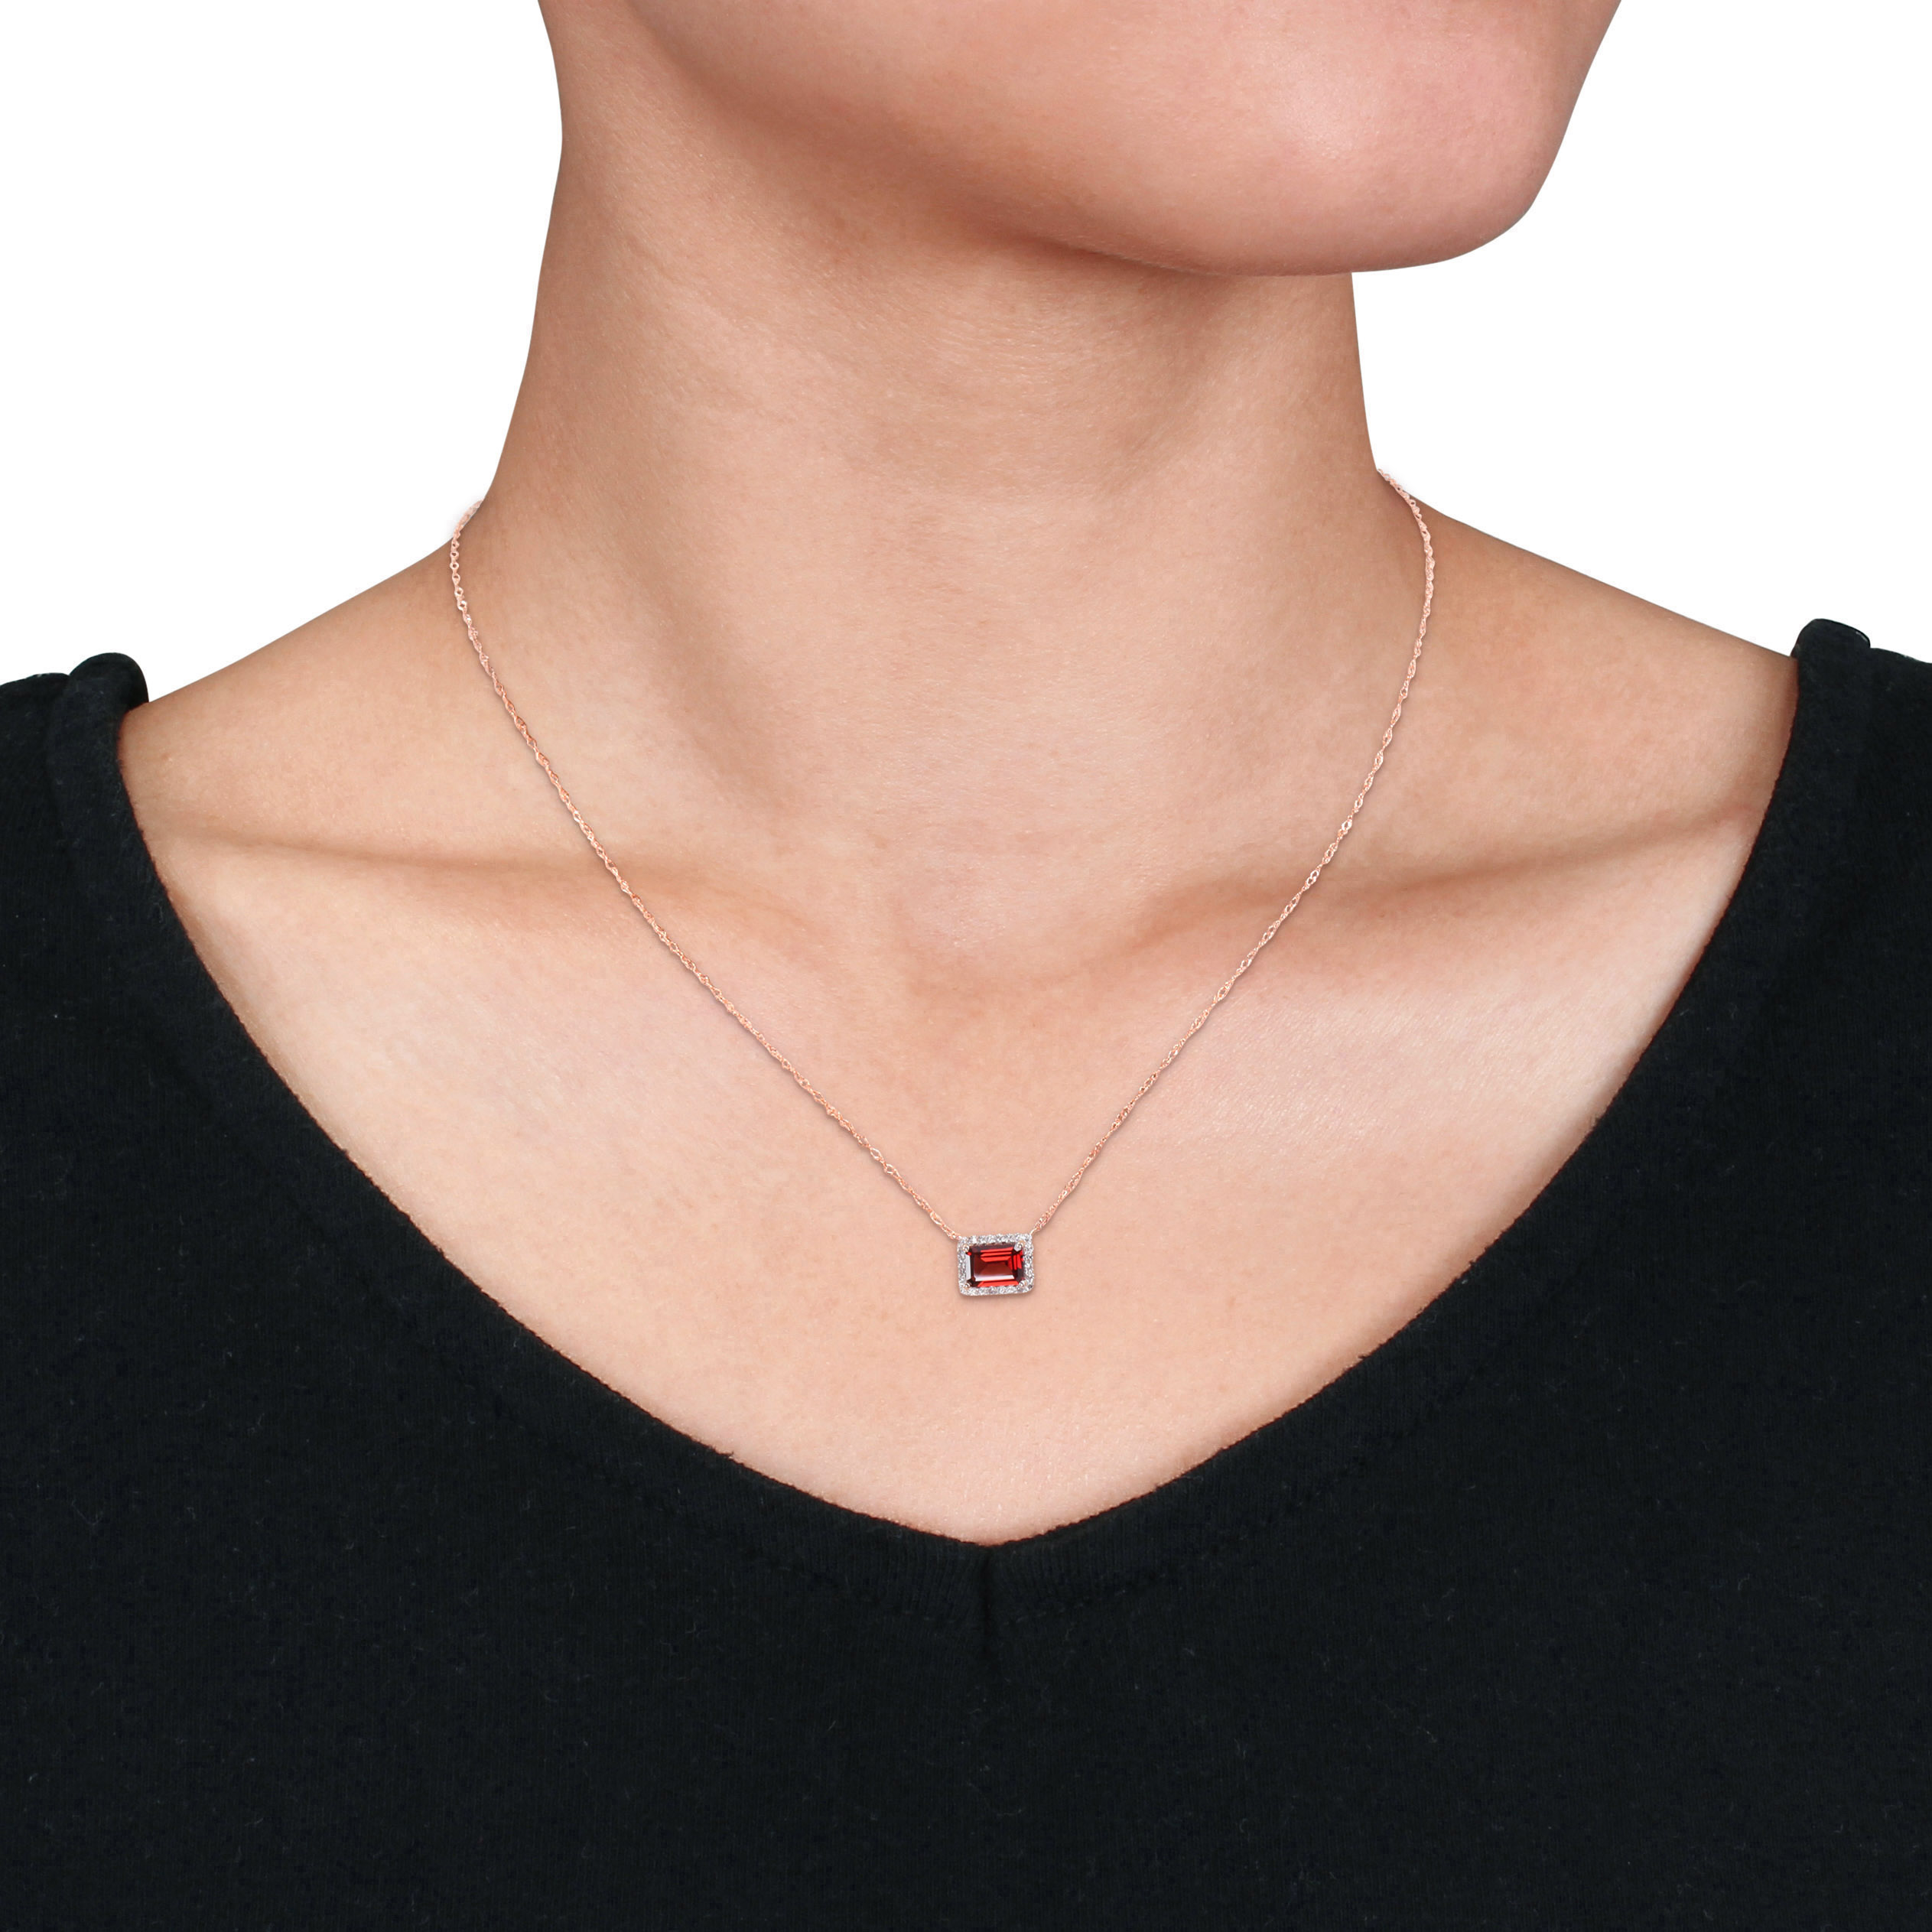 1 1/4 CT TGW Garnet and 1/8 CT TW Diamond Halo Square Necklace in 14k Rose Gold - 17 in.